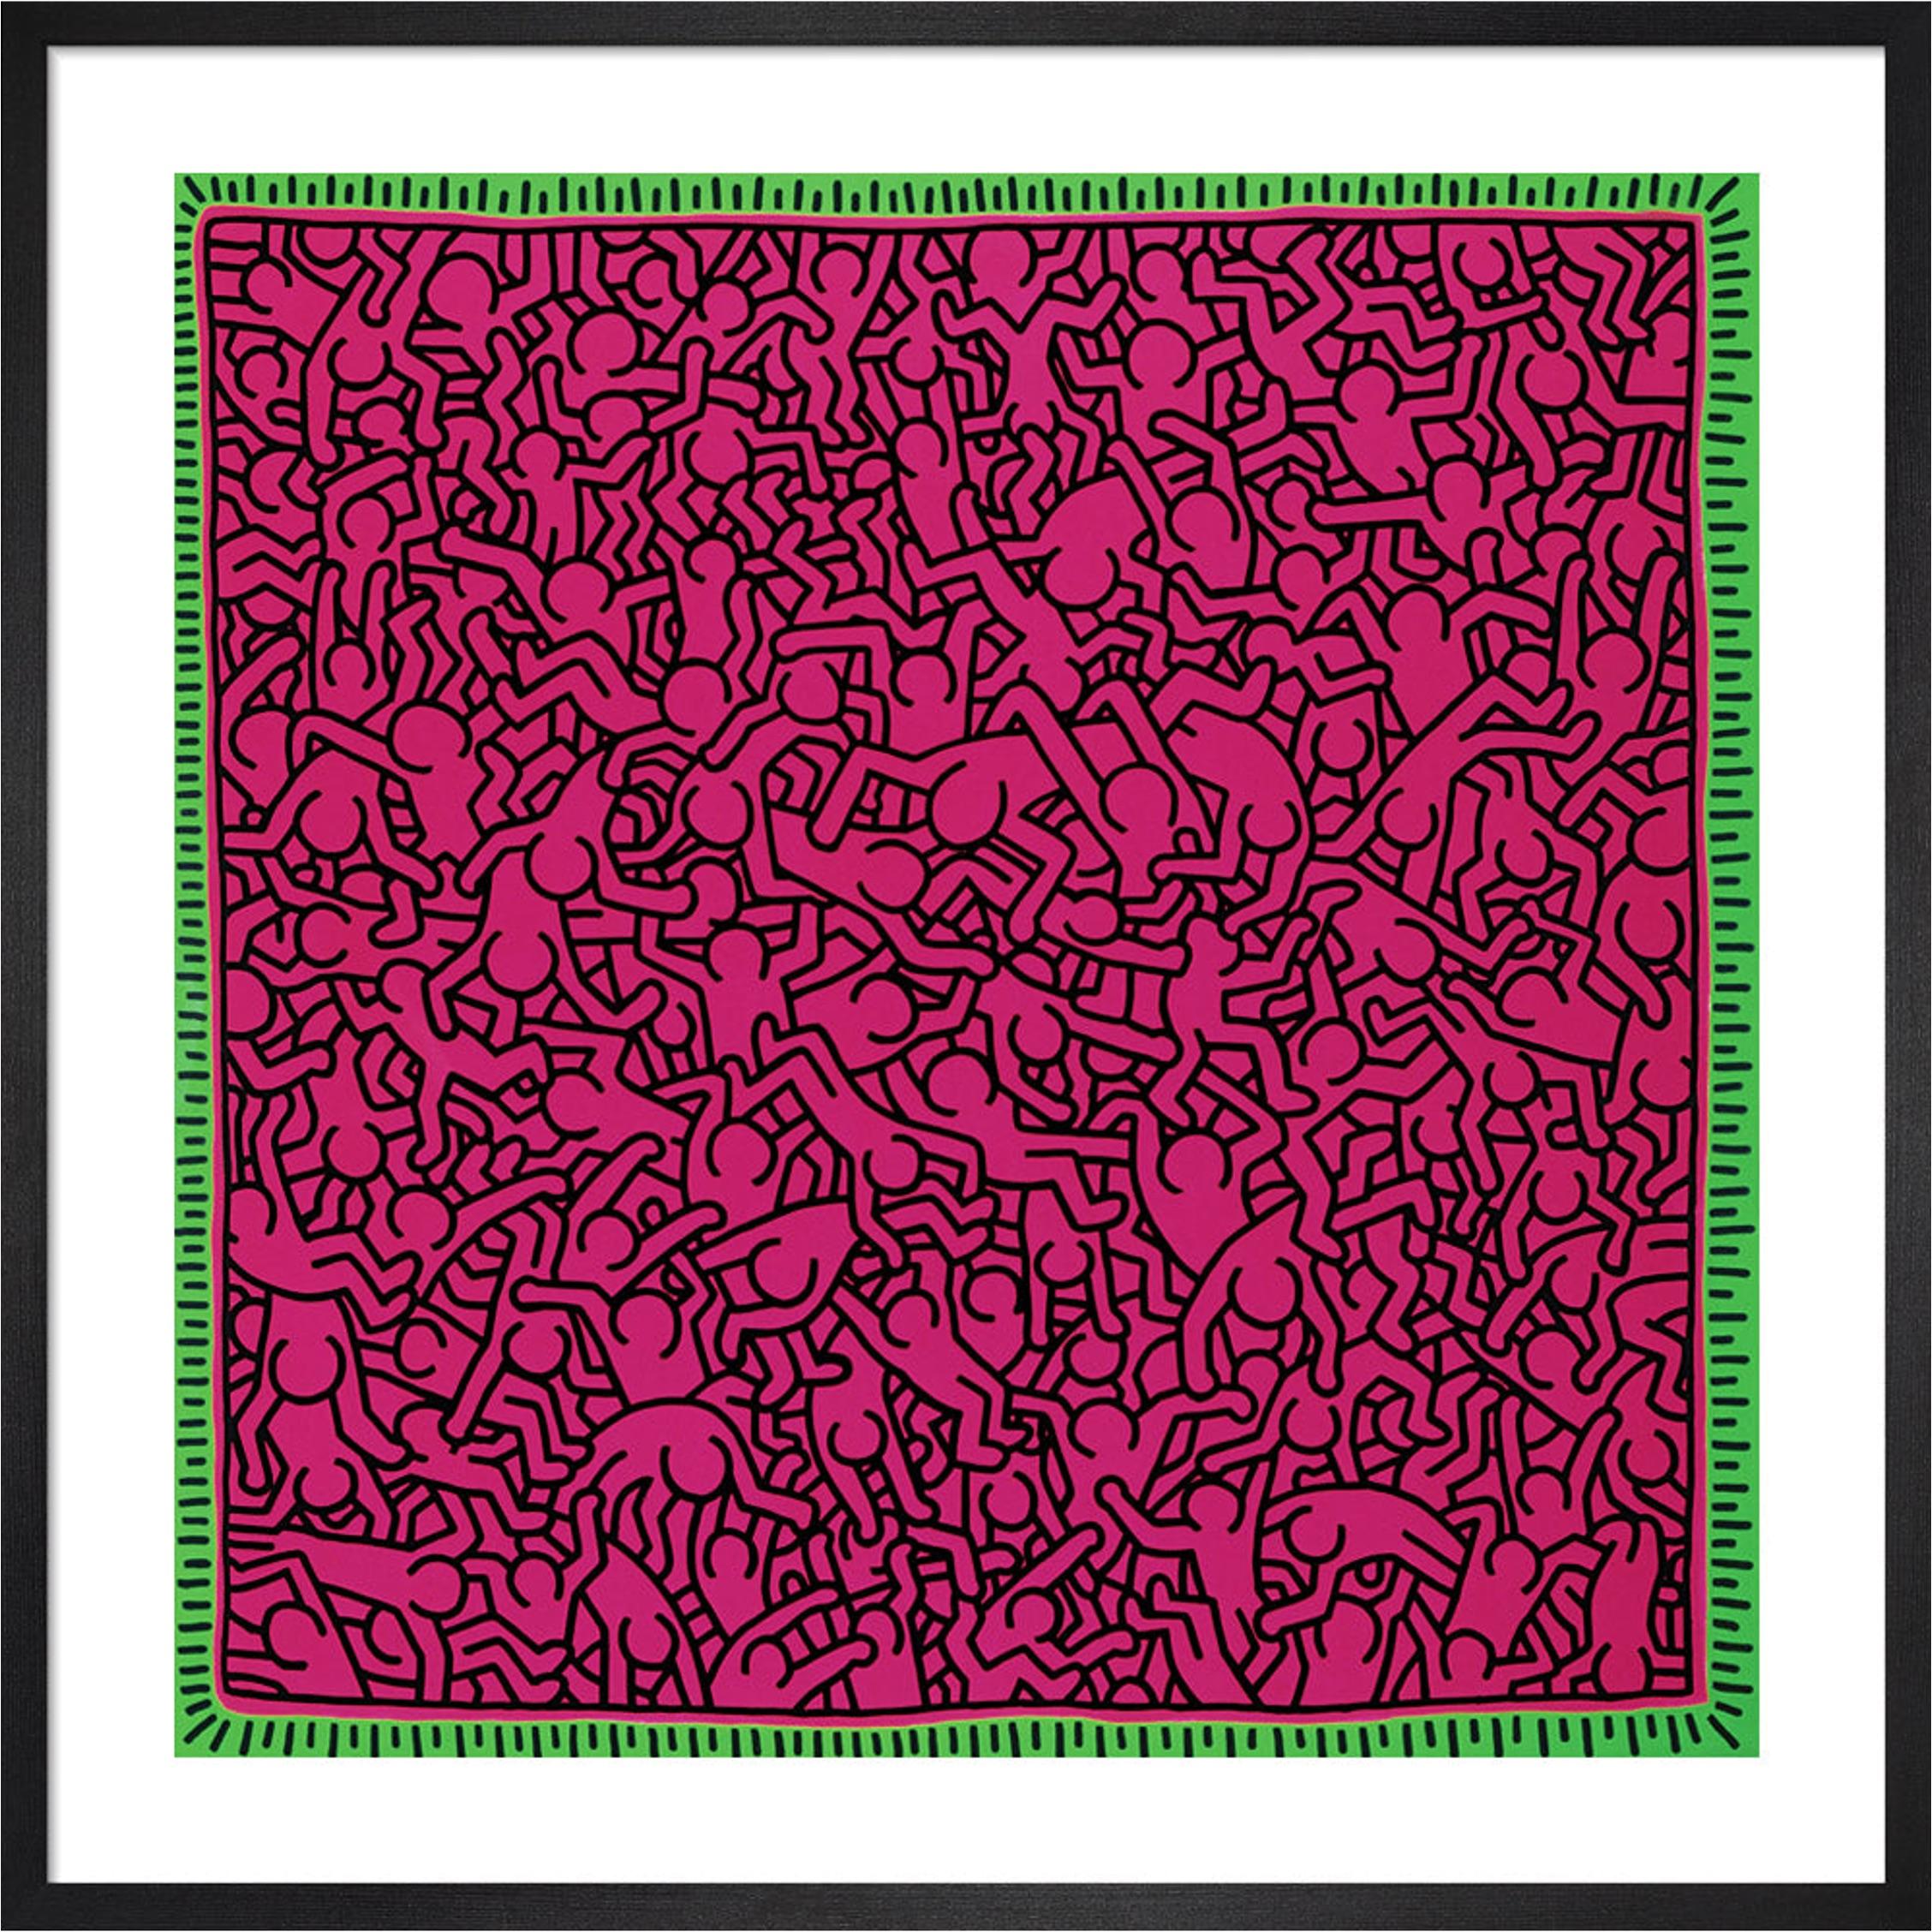 What mediums did Keith Haring use?